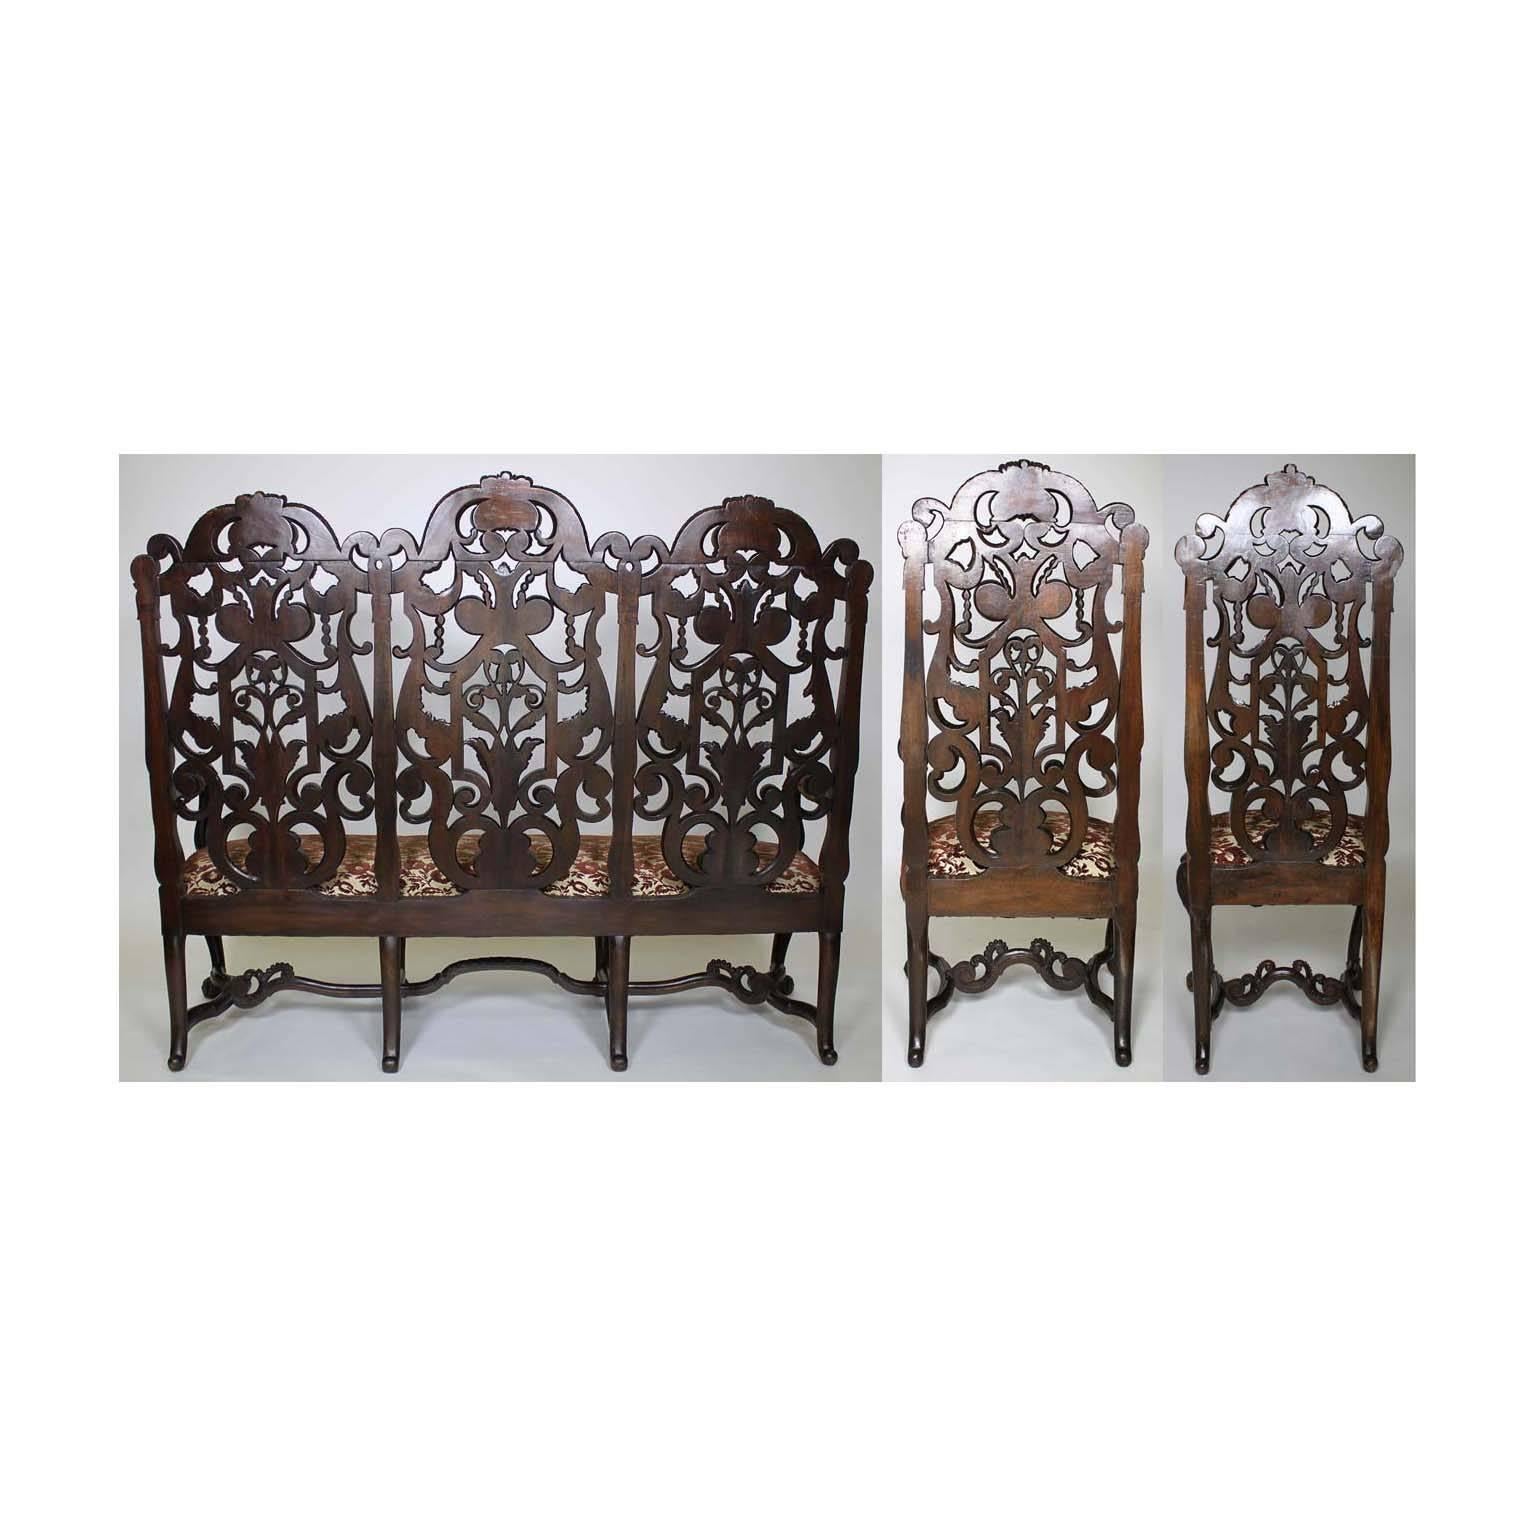 An Anglo-Dutch 19th Century Walnut Carved 5 Piece Parlor Set, After Daniel Marot For Sale 4